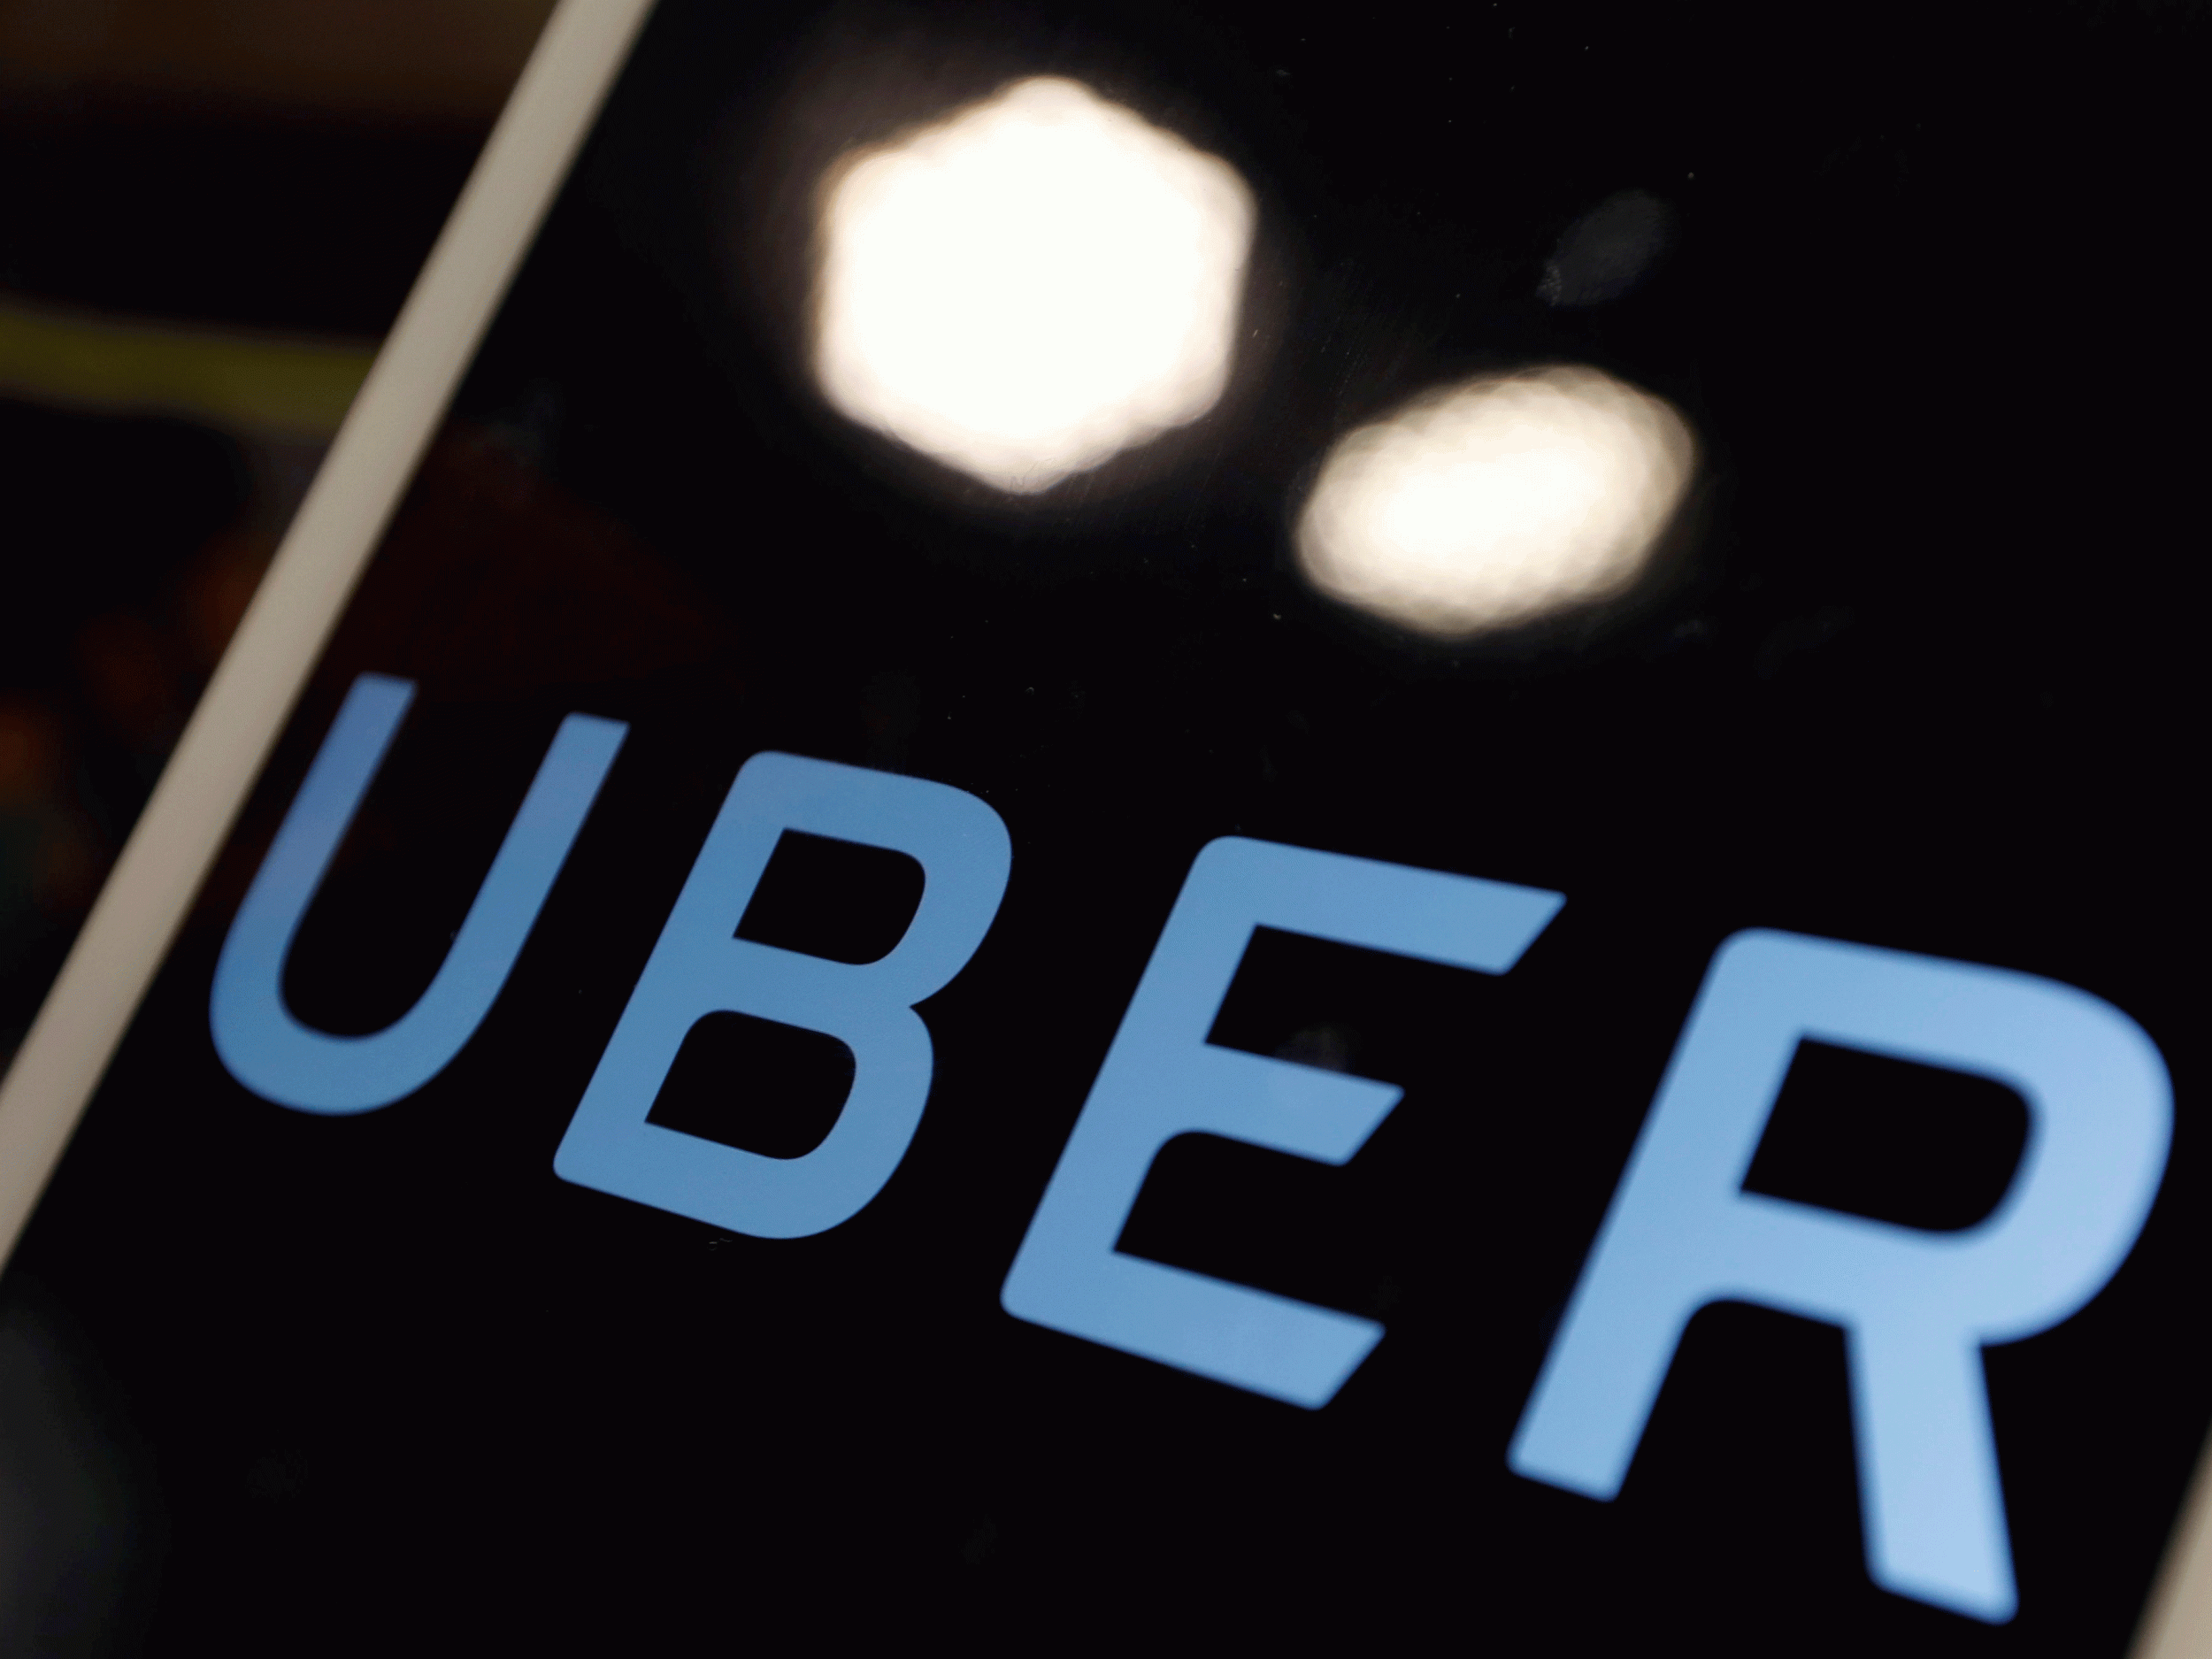 Uber has suffered a series of public relations crises, including a criminal probe into technology it created